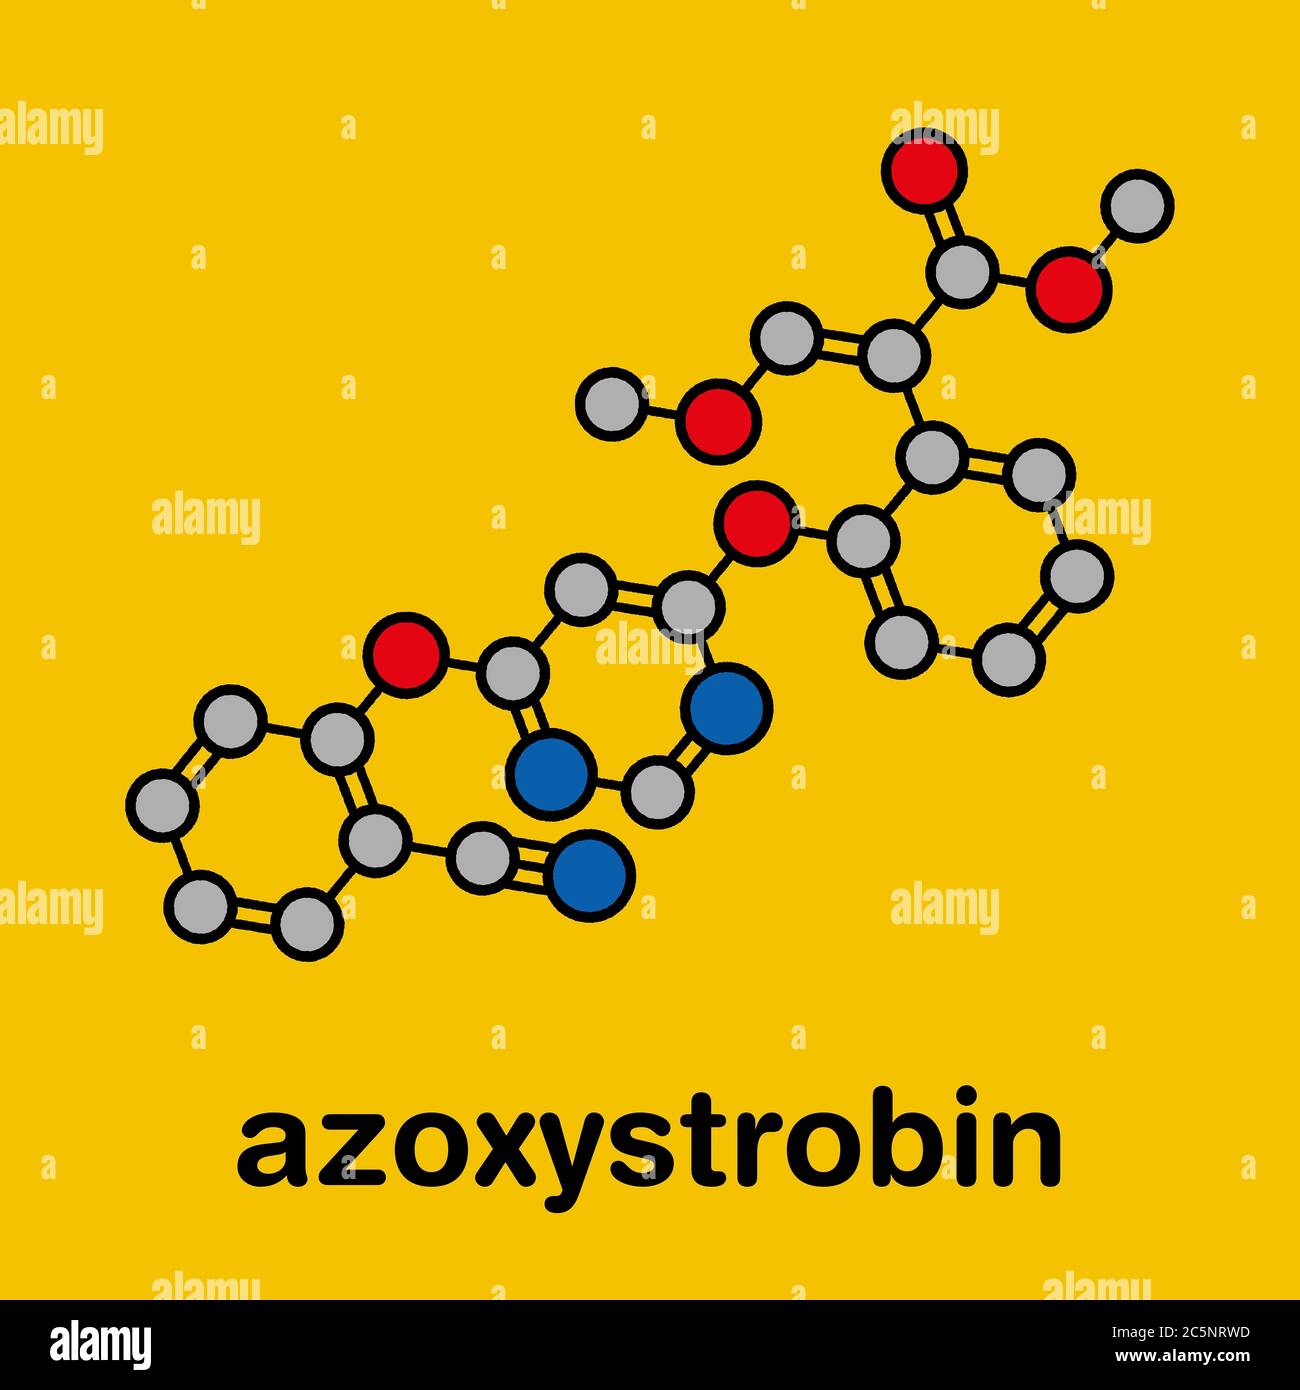 Azoxystrobin fungicide molecule. Stylized skeletal formula (chemical structure): Atoms are shown as color-coded circles: hydrogen (hidden), carbon (grey), nitrogen (blue), oxygen (red). Stock Photo